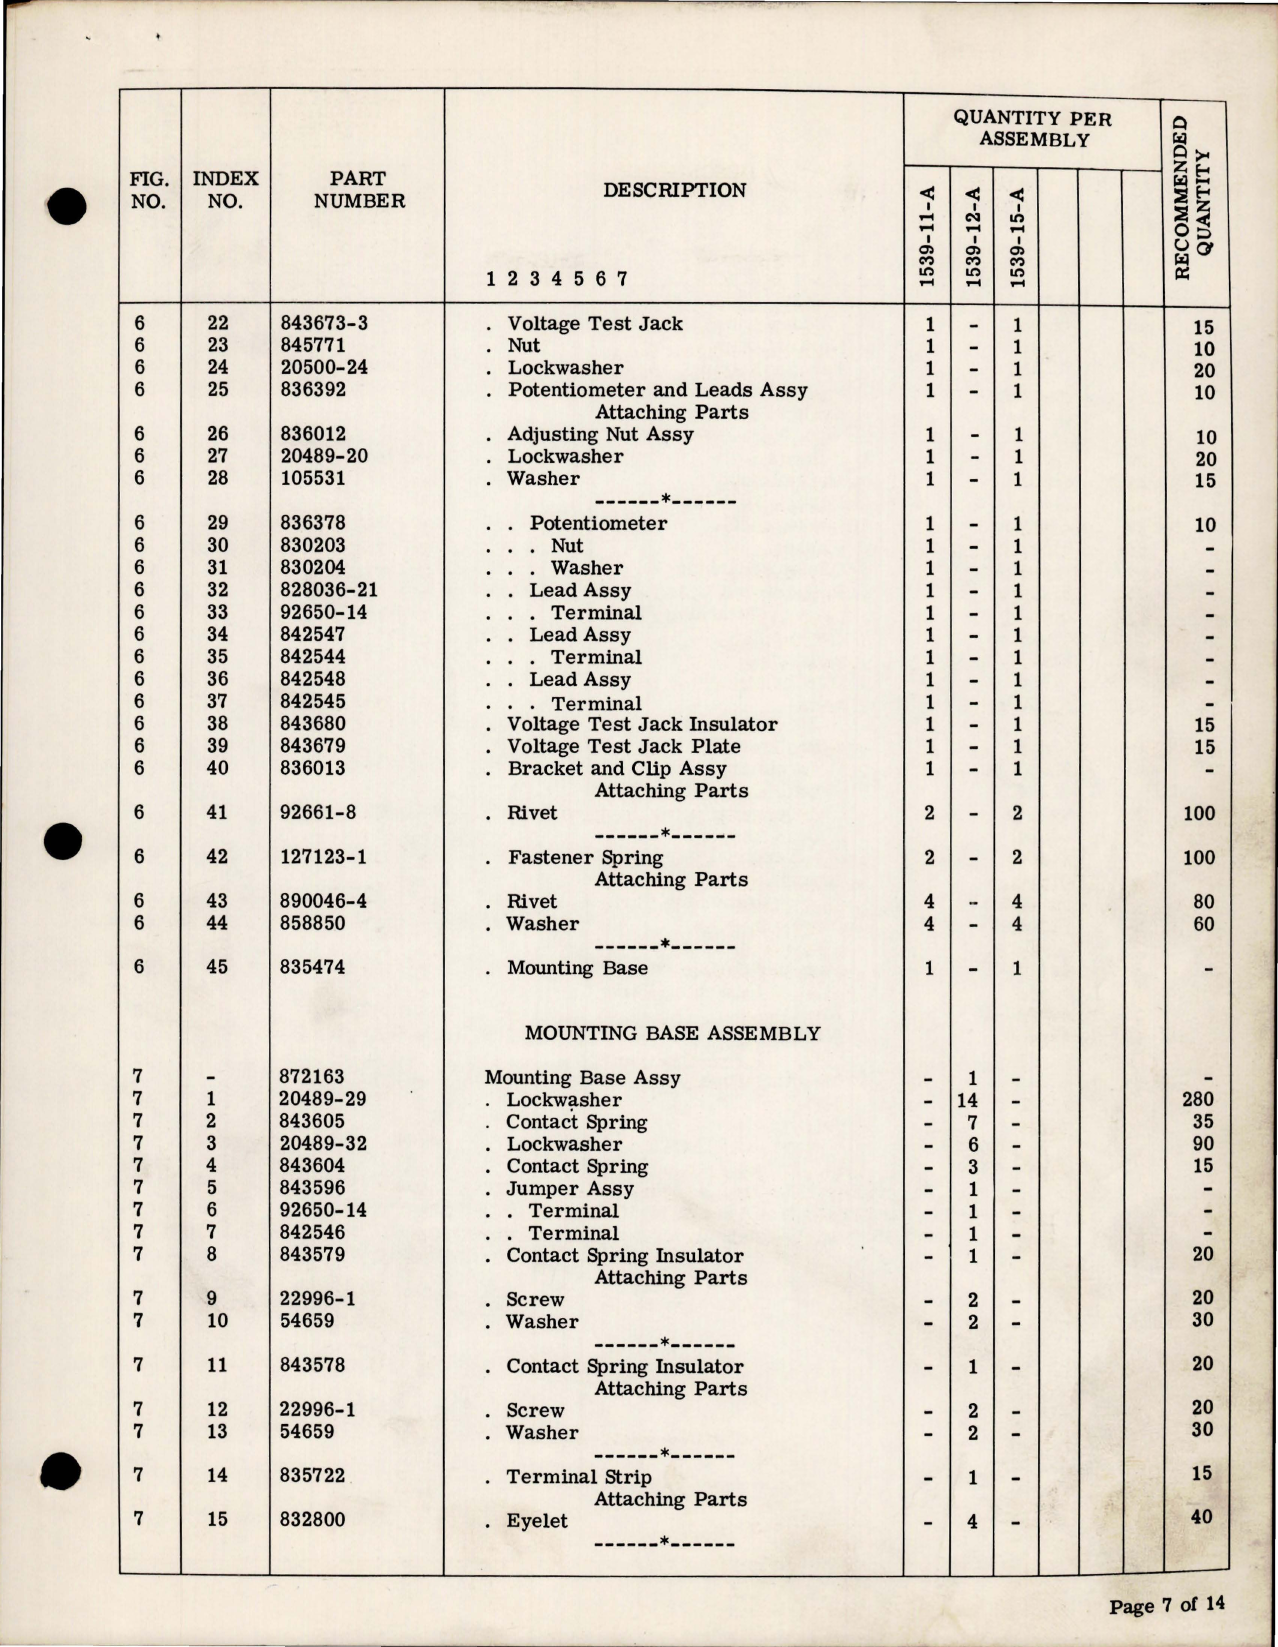 Sample page 7 from AirCorps Library document: Service Parts List for Generator Control Panel - 1539-11-A, 1539-12-A and 1539-15-A 